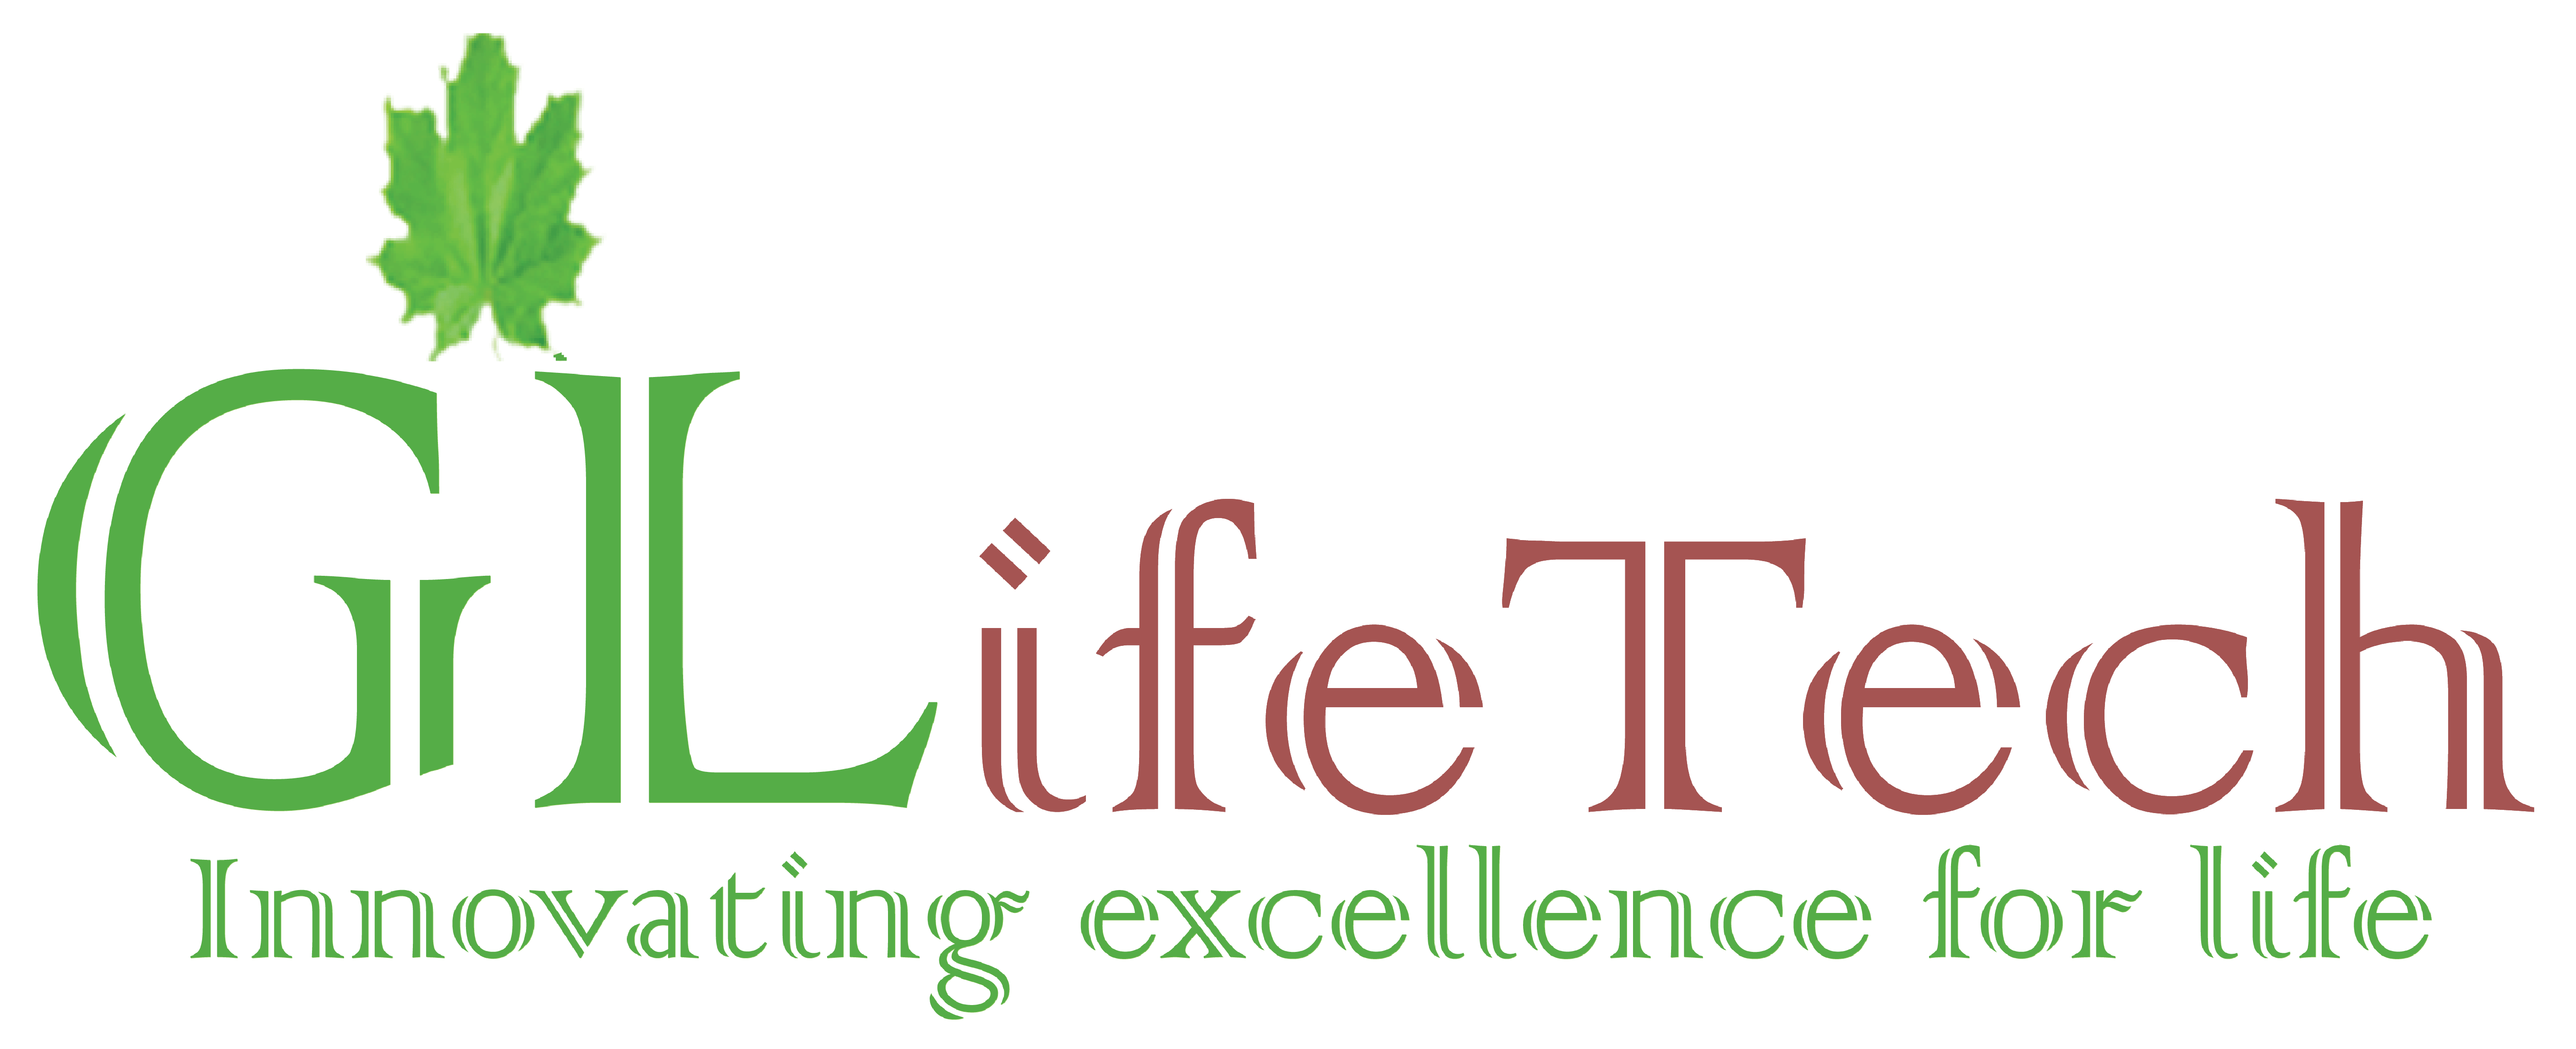 Innovating Excellence for life